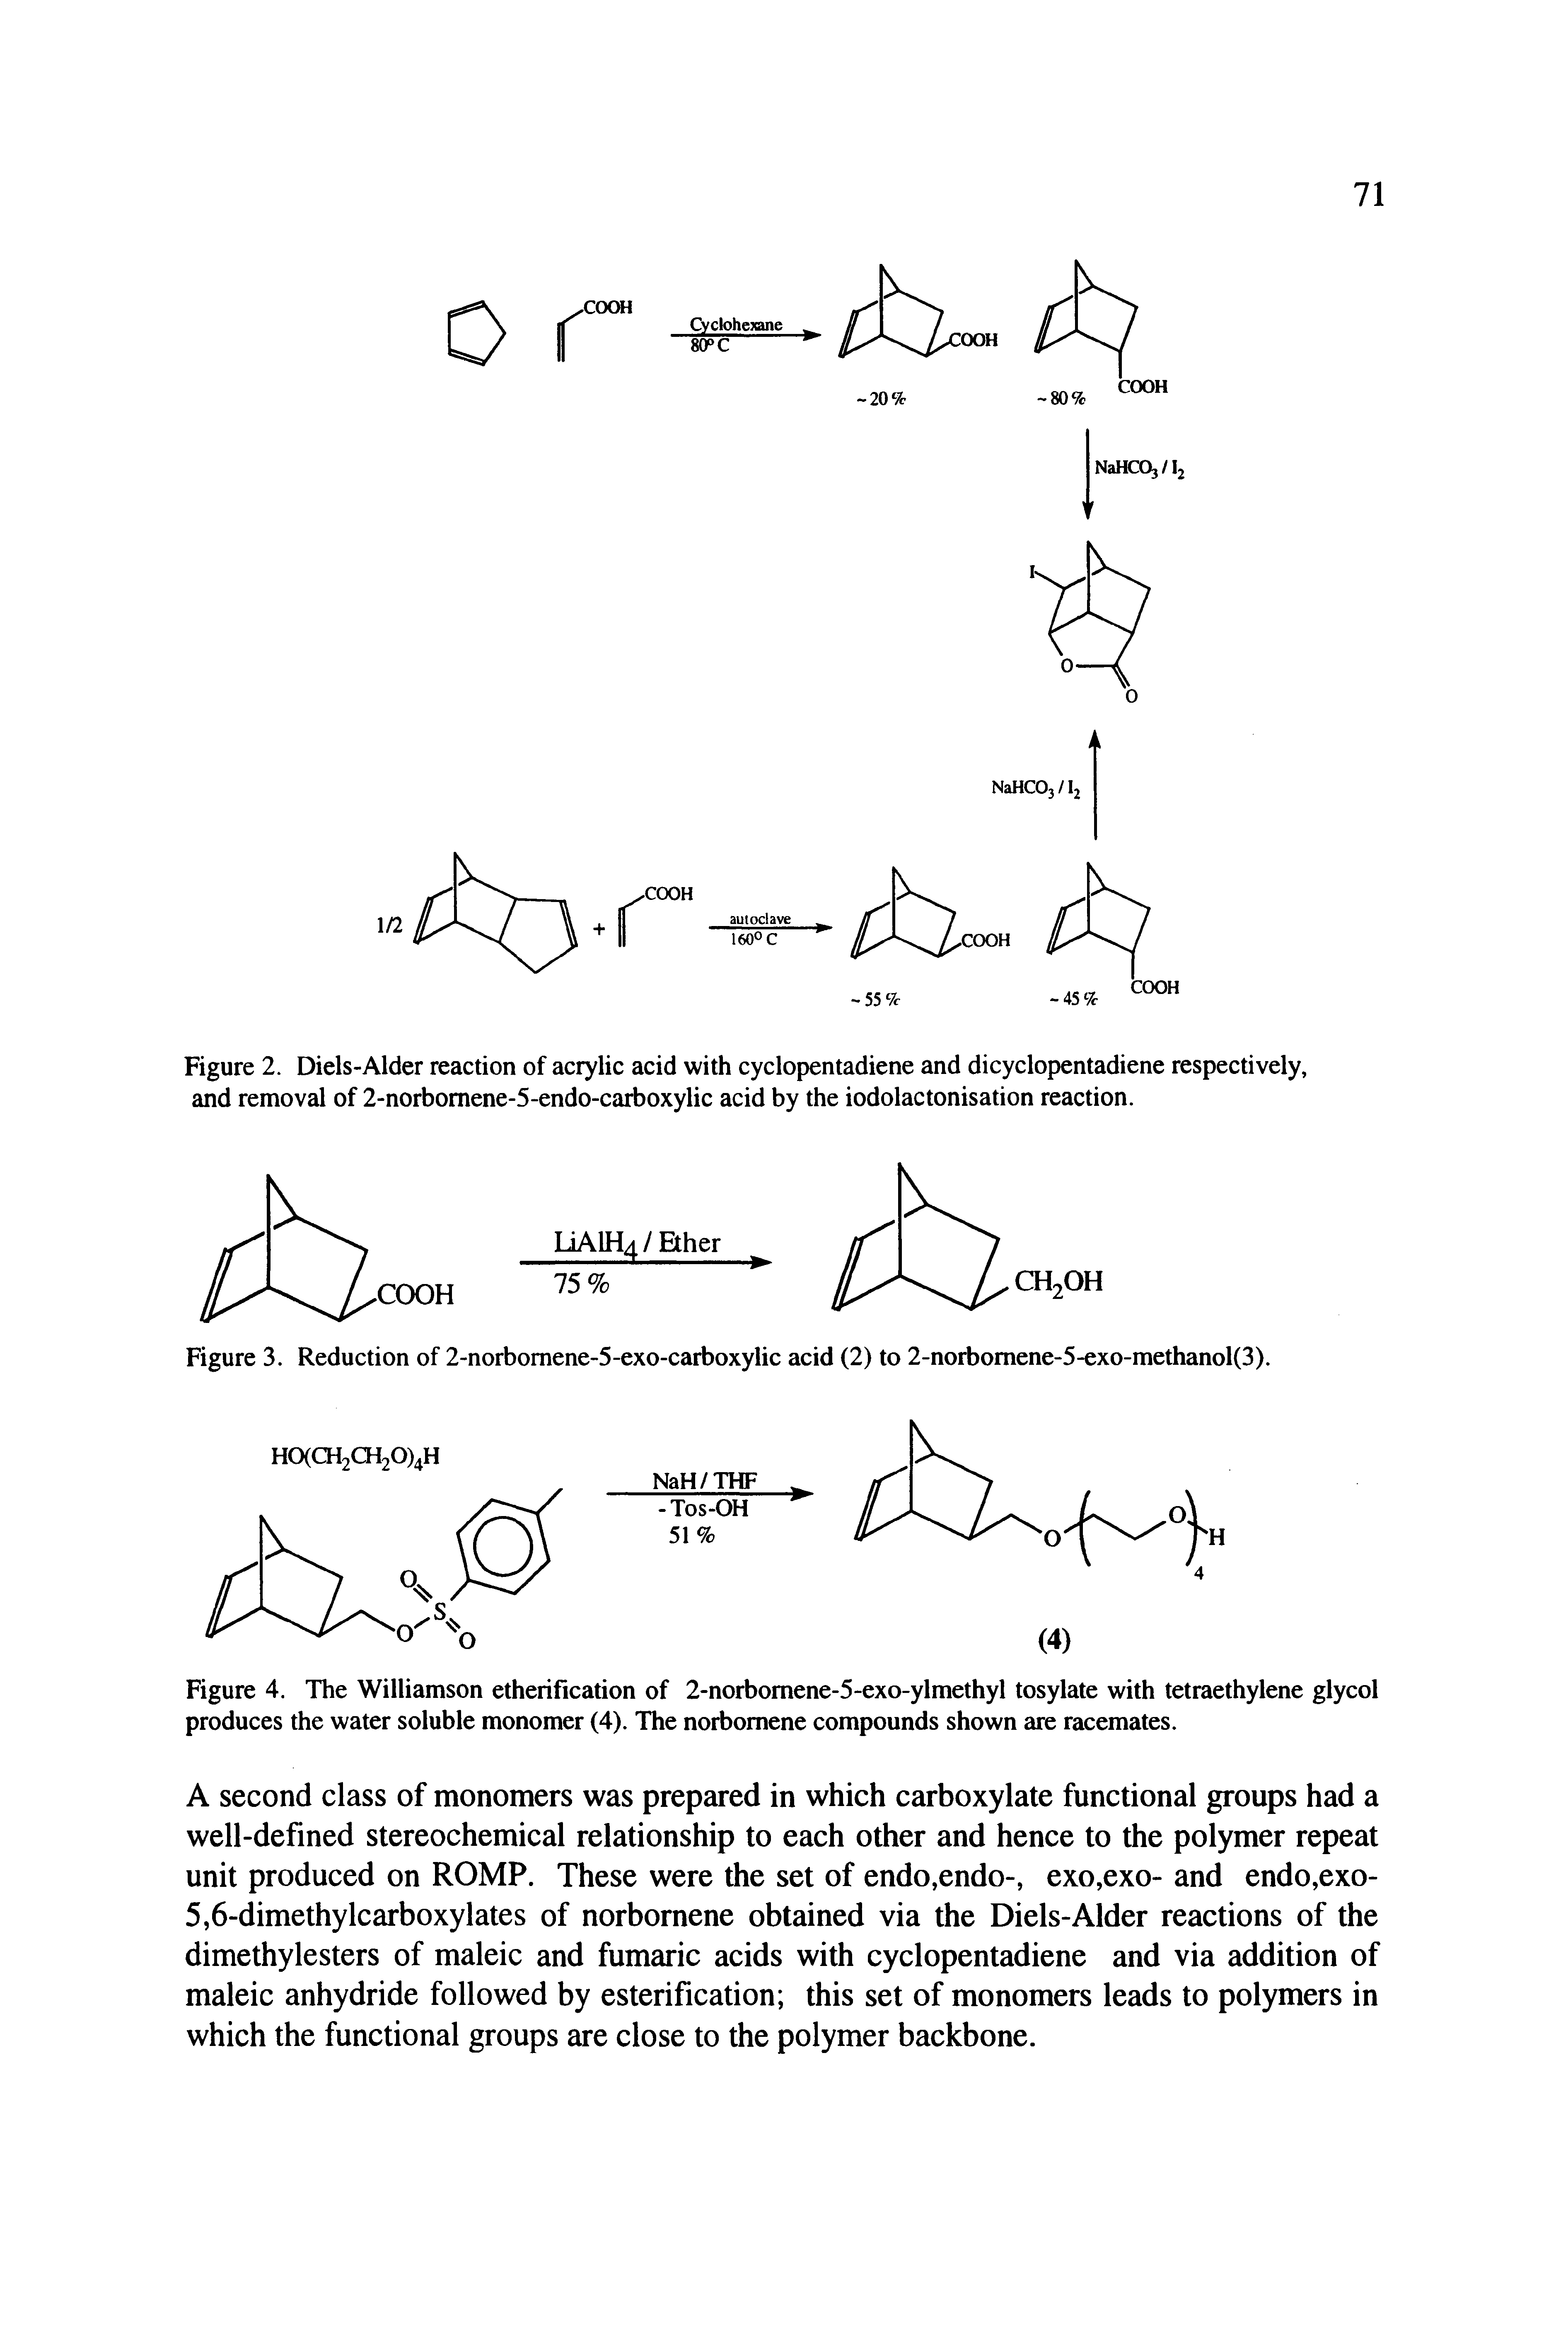 Figure 4. The Williamson etherification of 2-norbomene-5-exo-ylmethyl tosylate with tetraethylene glycol produces the water soluble monomer (4). The norbomene compounds shown are racemates.